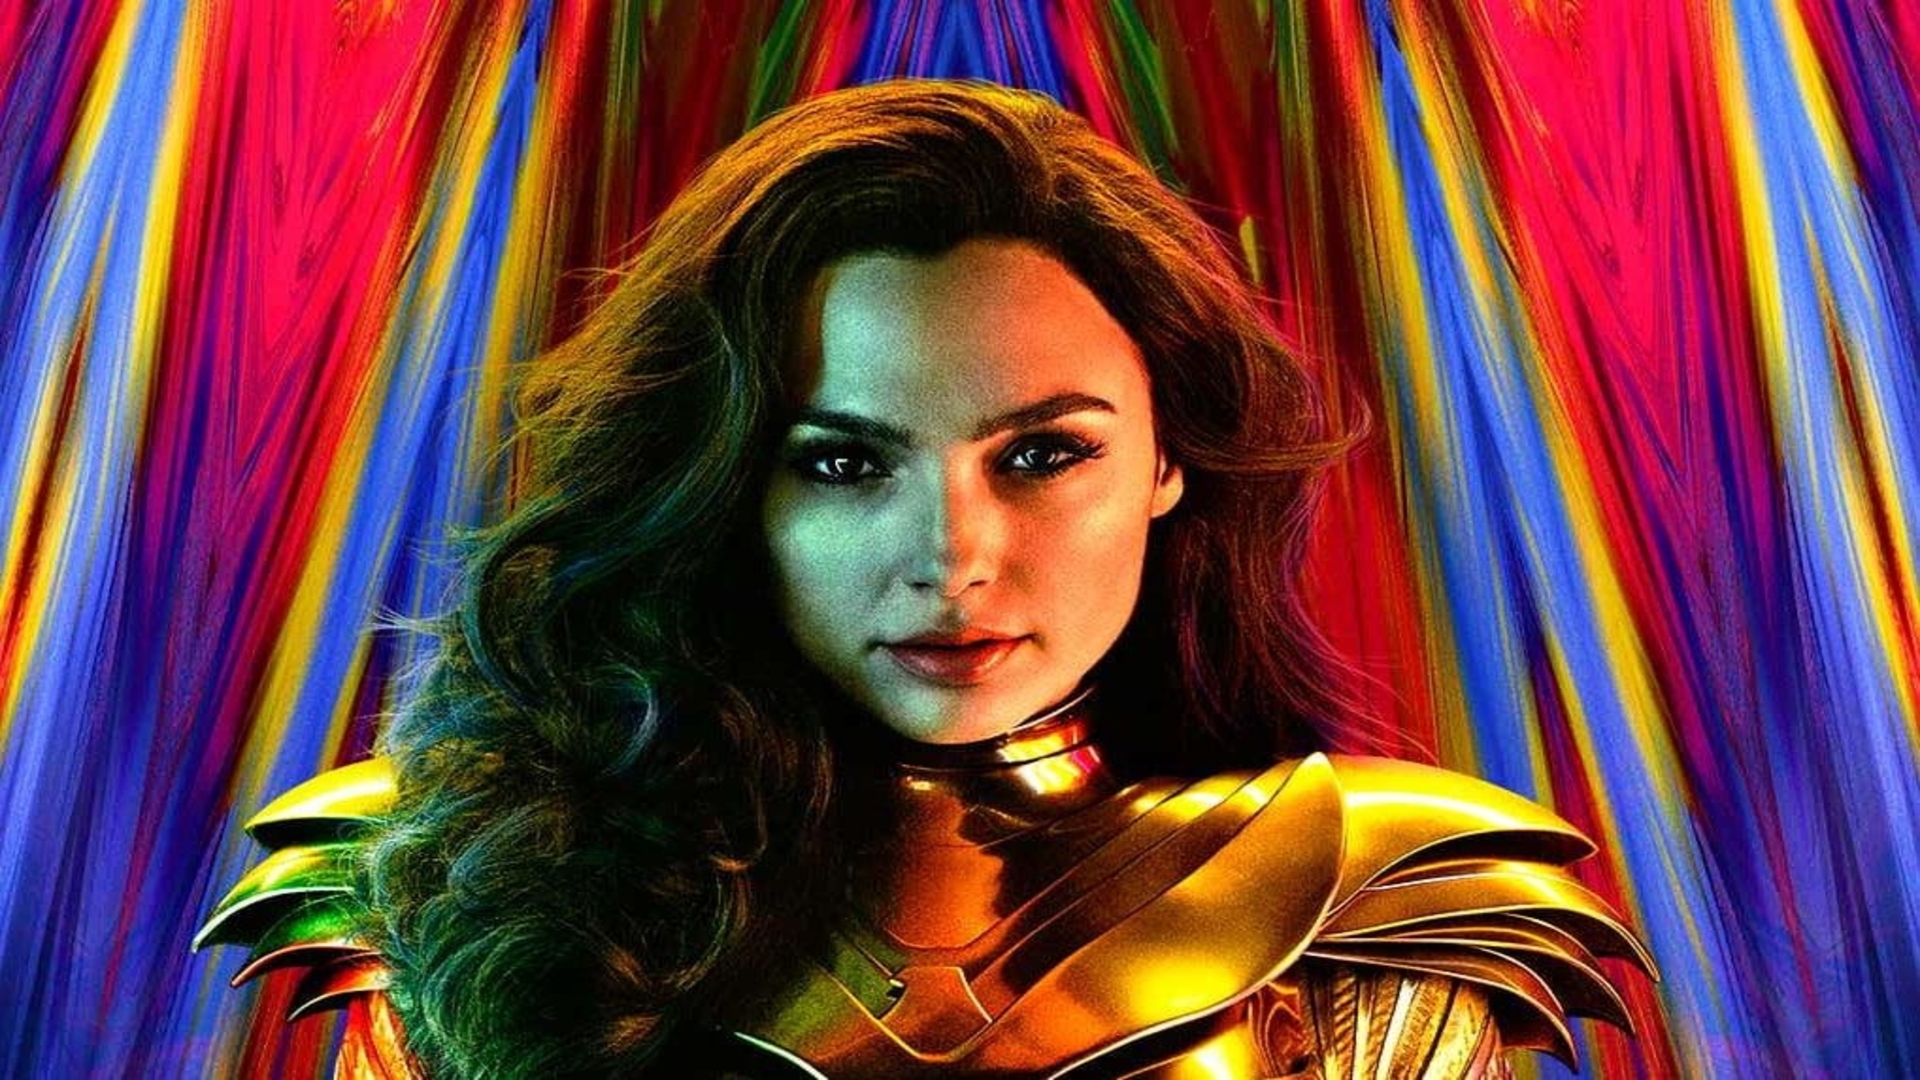 New Wonder Woman 1984 Poster Featuring The Lasso Of Truth Revealed